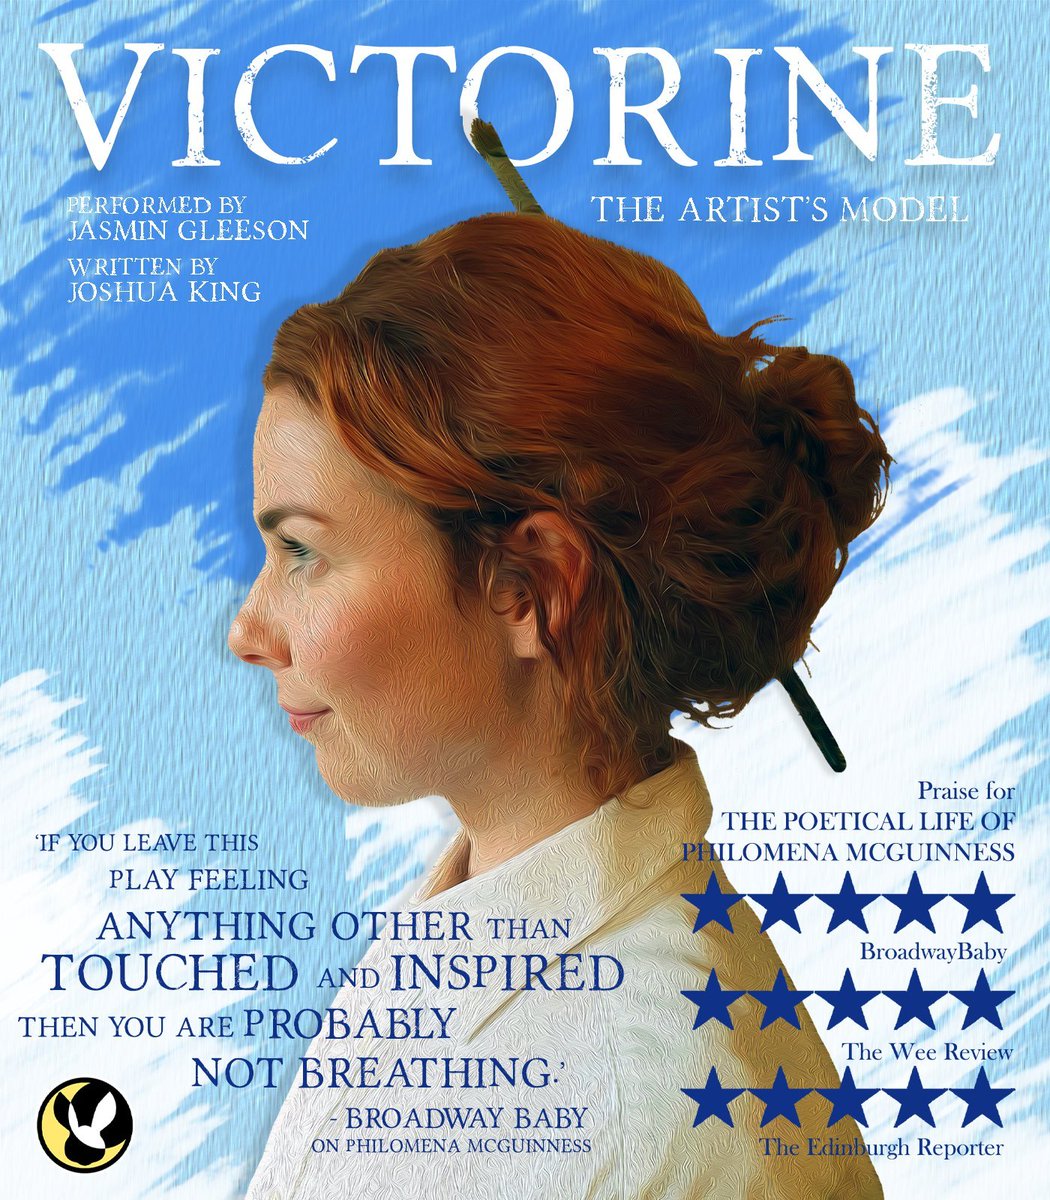 @rhcatlover We'd love to have you at Victorine: The Artist's Model - it's a new, one-woman play about female Impressionists and models in 1860s Paris.
tickets.edfringe.com/whats-on/victo…